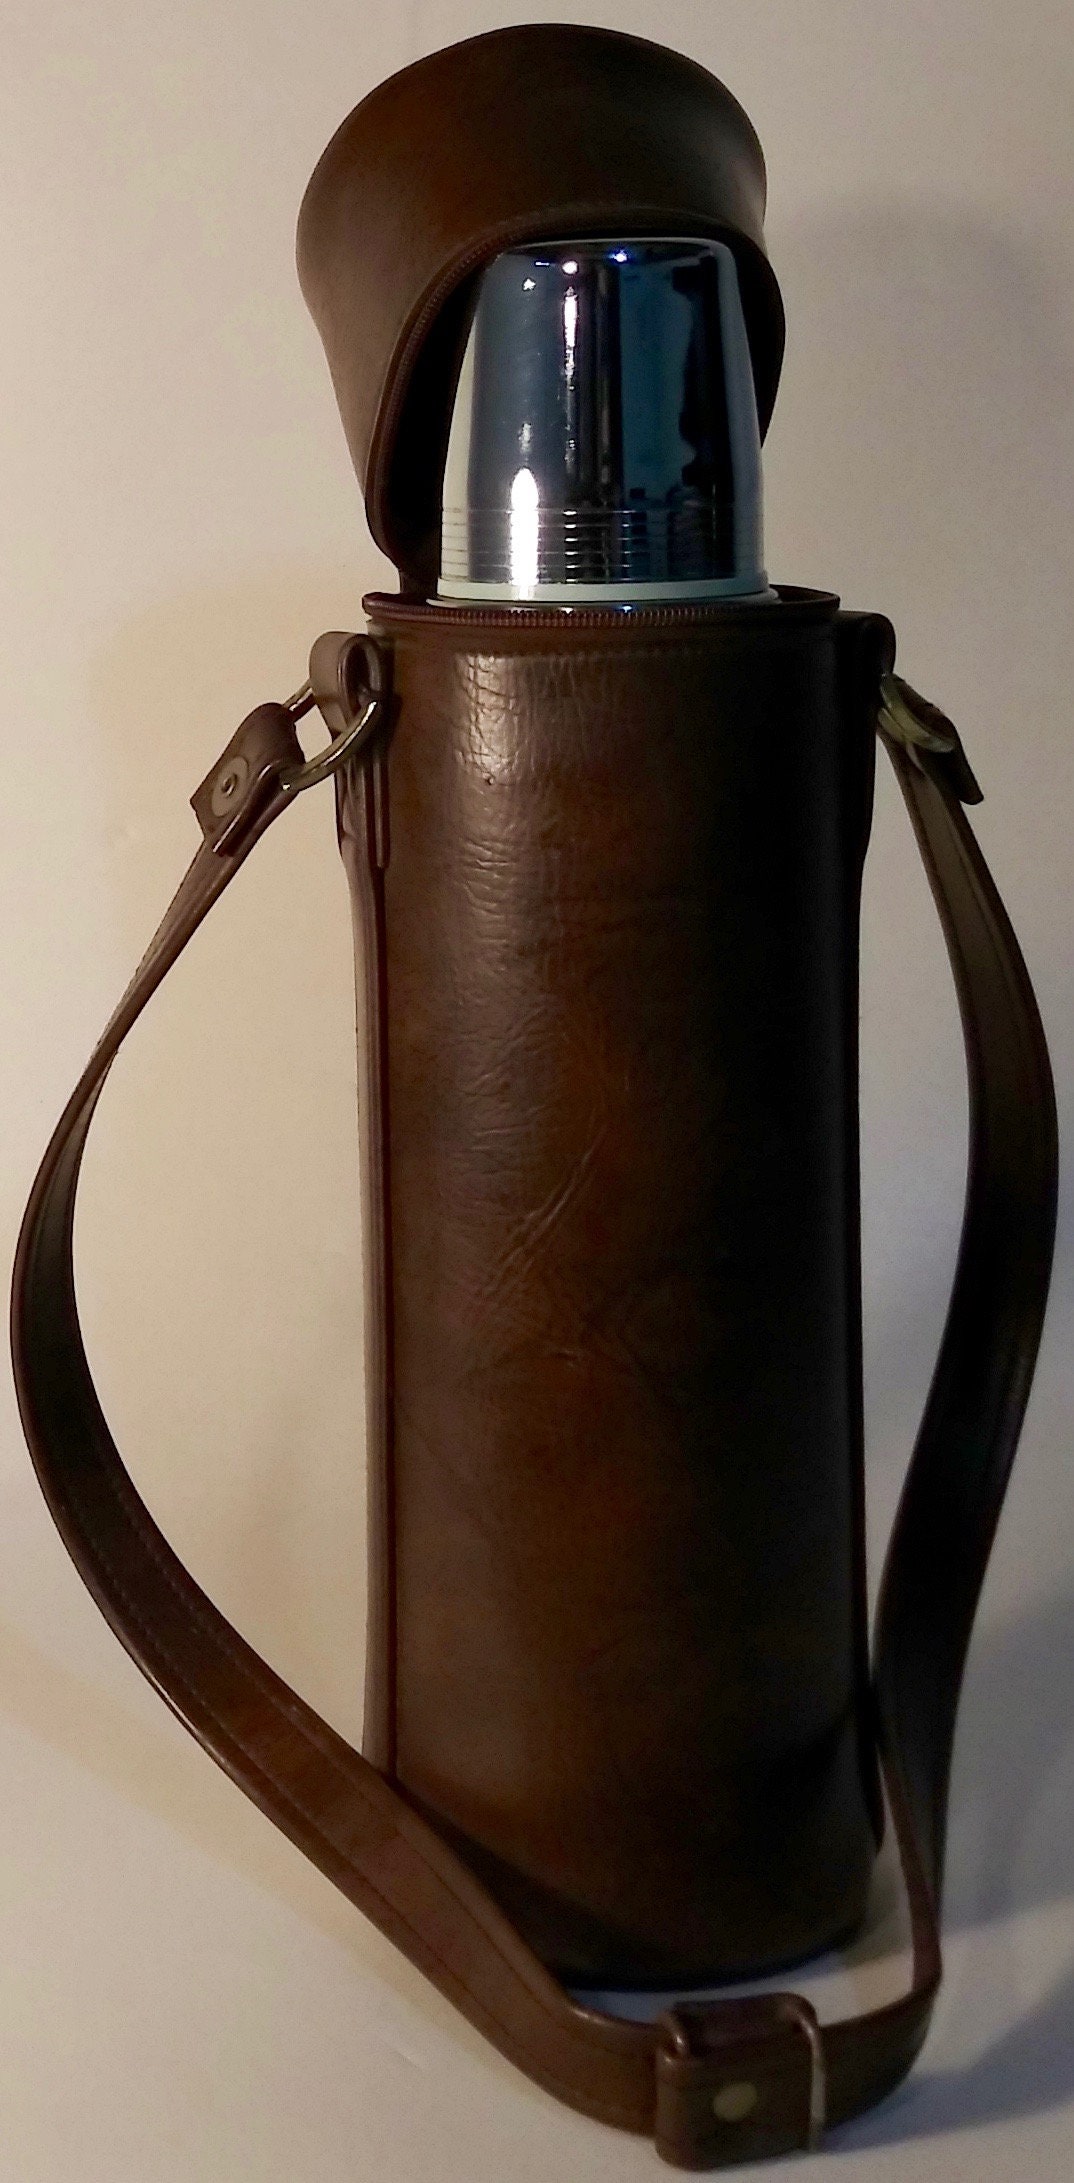 Aladdin Thermos with Leather Case Combo Vintage Stanley Aladdin Stainless Steel Thermos with Leather Carrying Case by Hozel